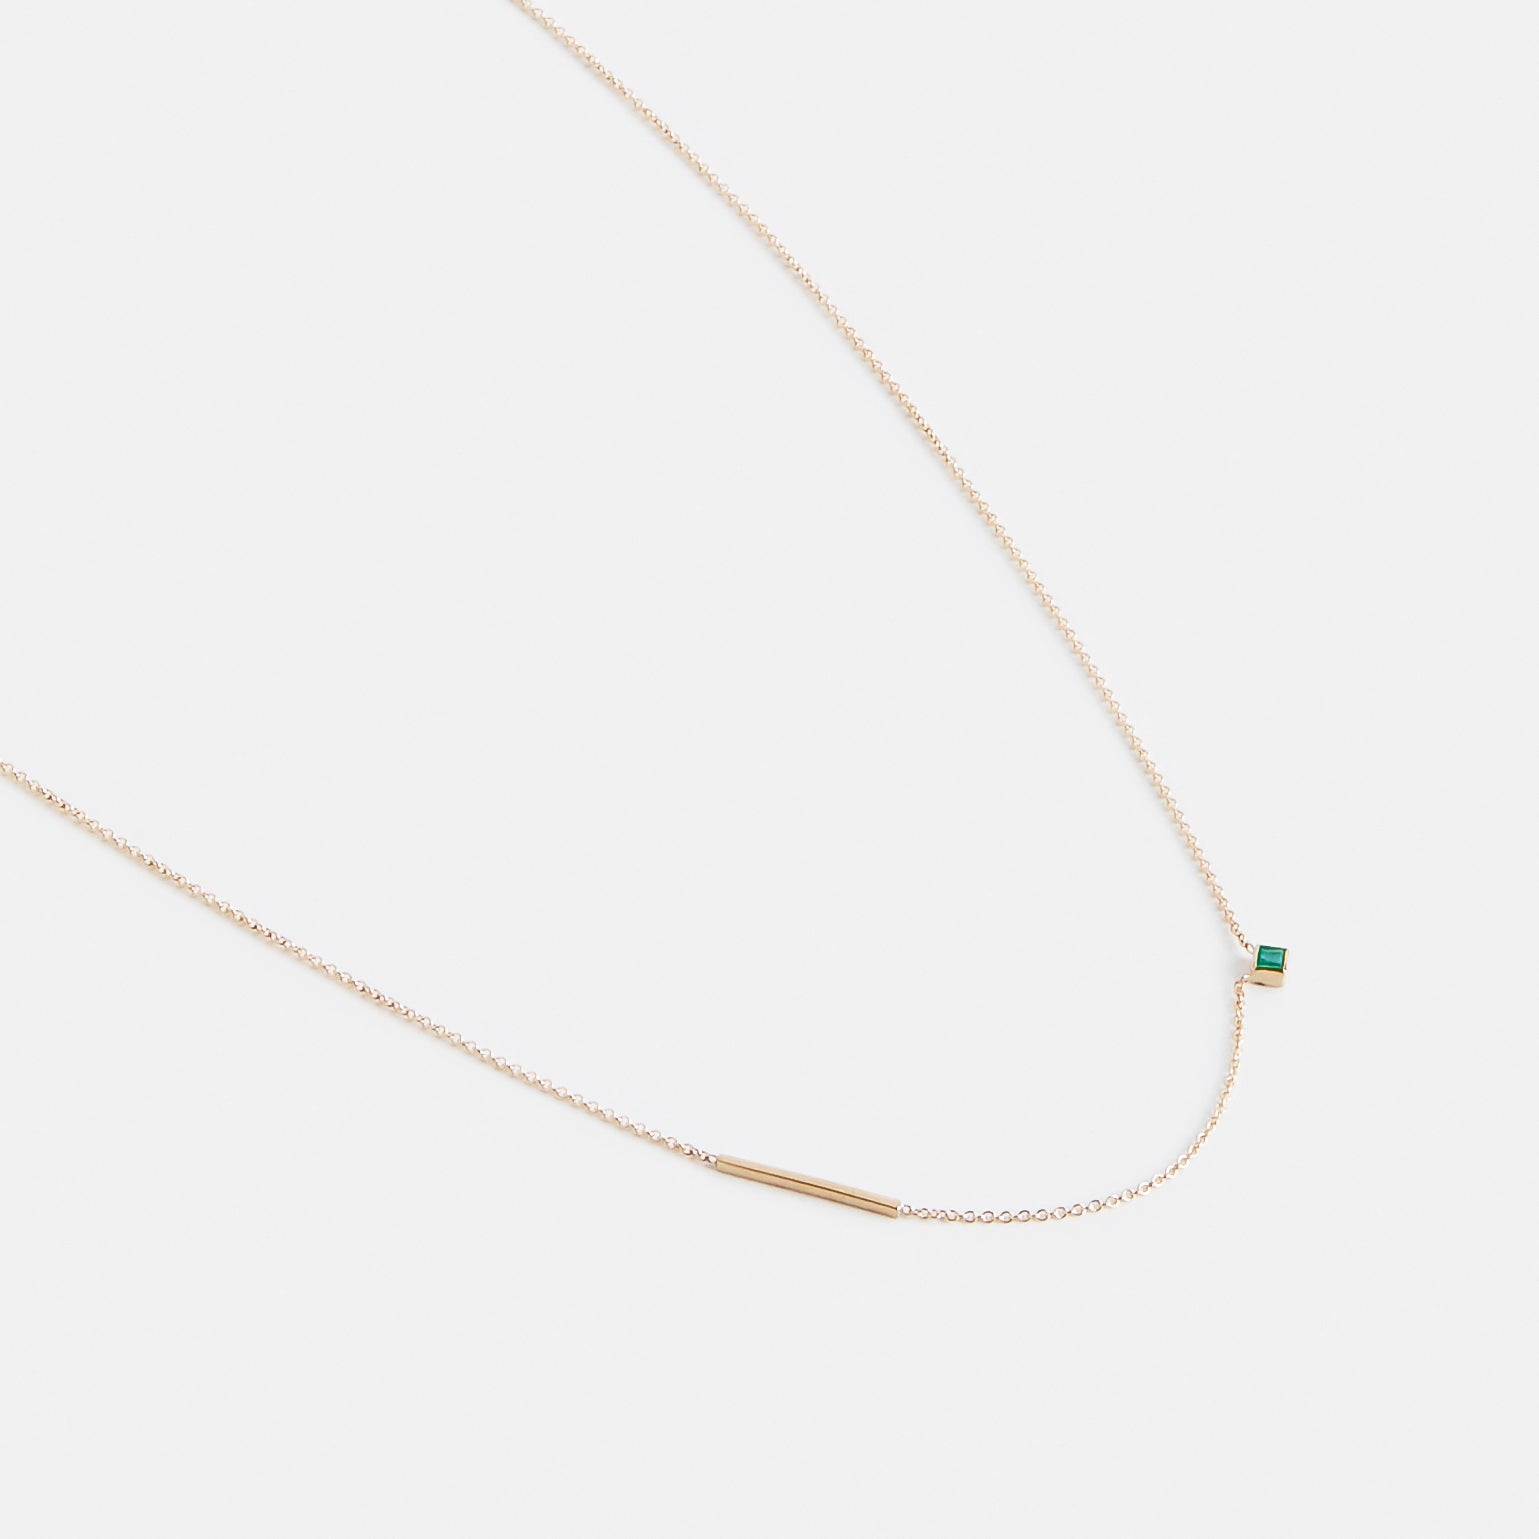 Inu Delicate Necklace in 14k Gold Set with Emerald By SHW Fine Jewelry NYC